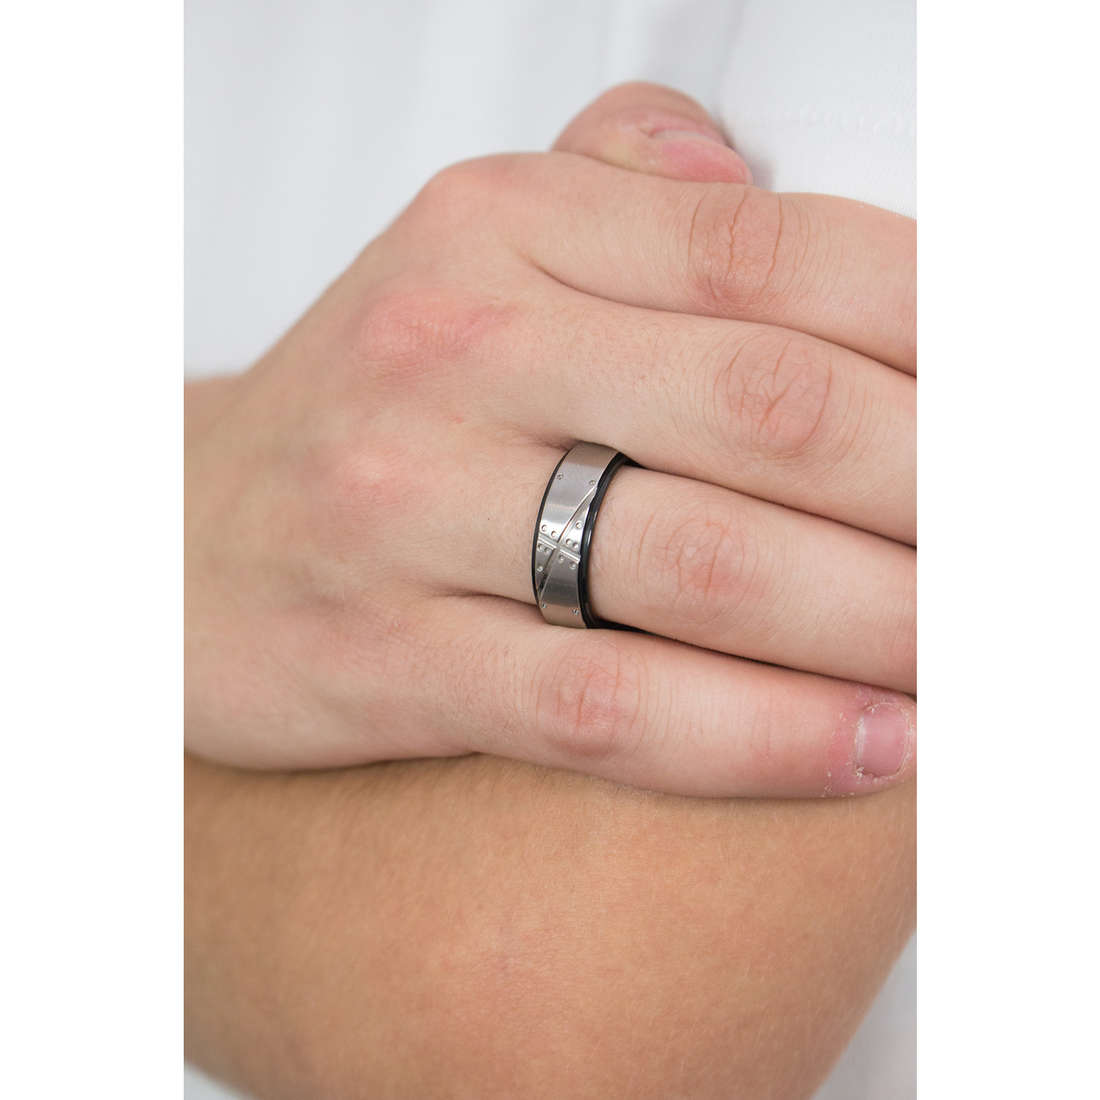 Sector rings Row man SACX07021 wearing